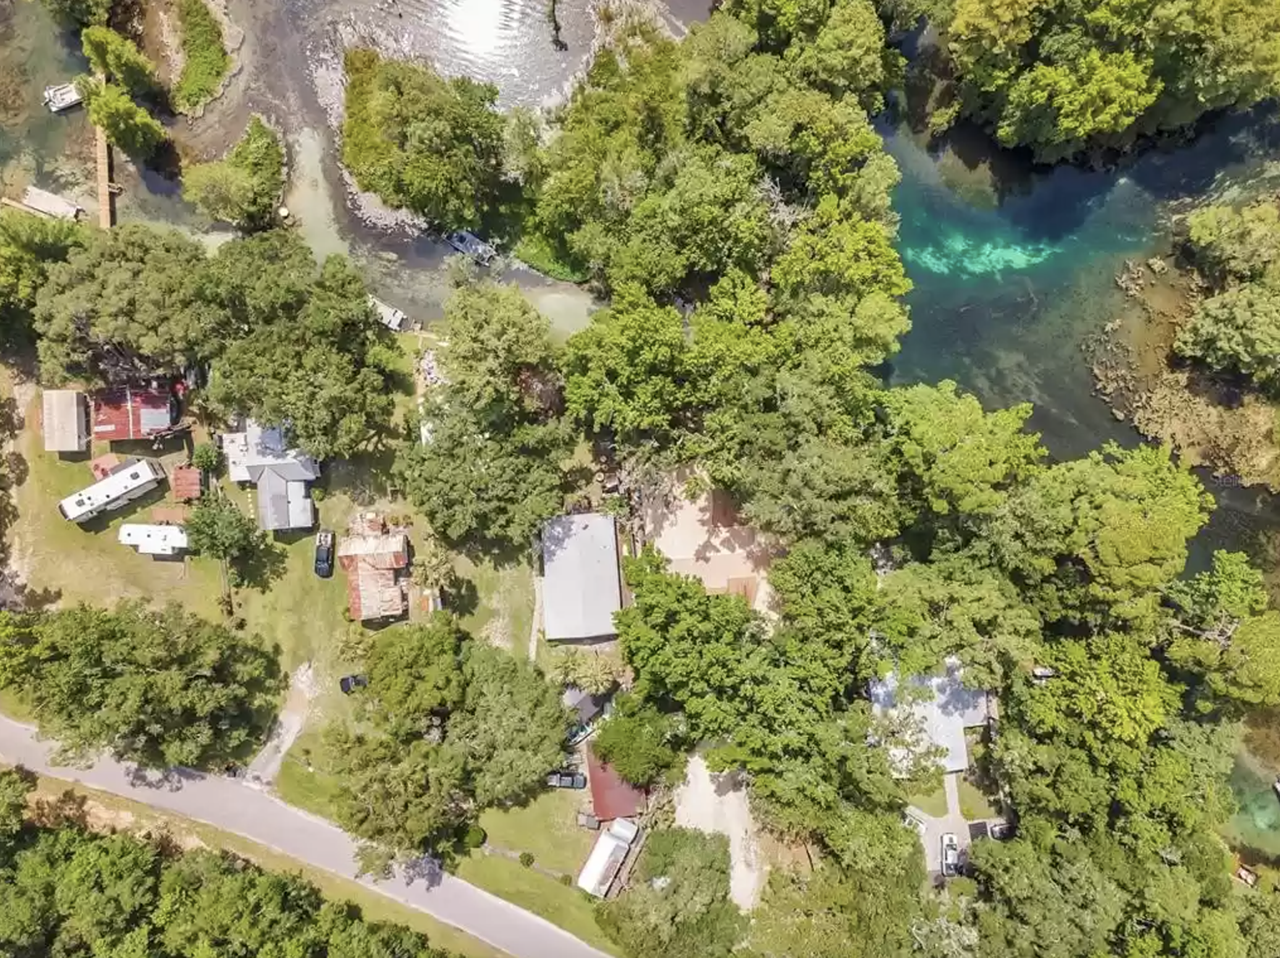 This Florida spring home on the Rainbow River comes with its own private island